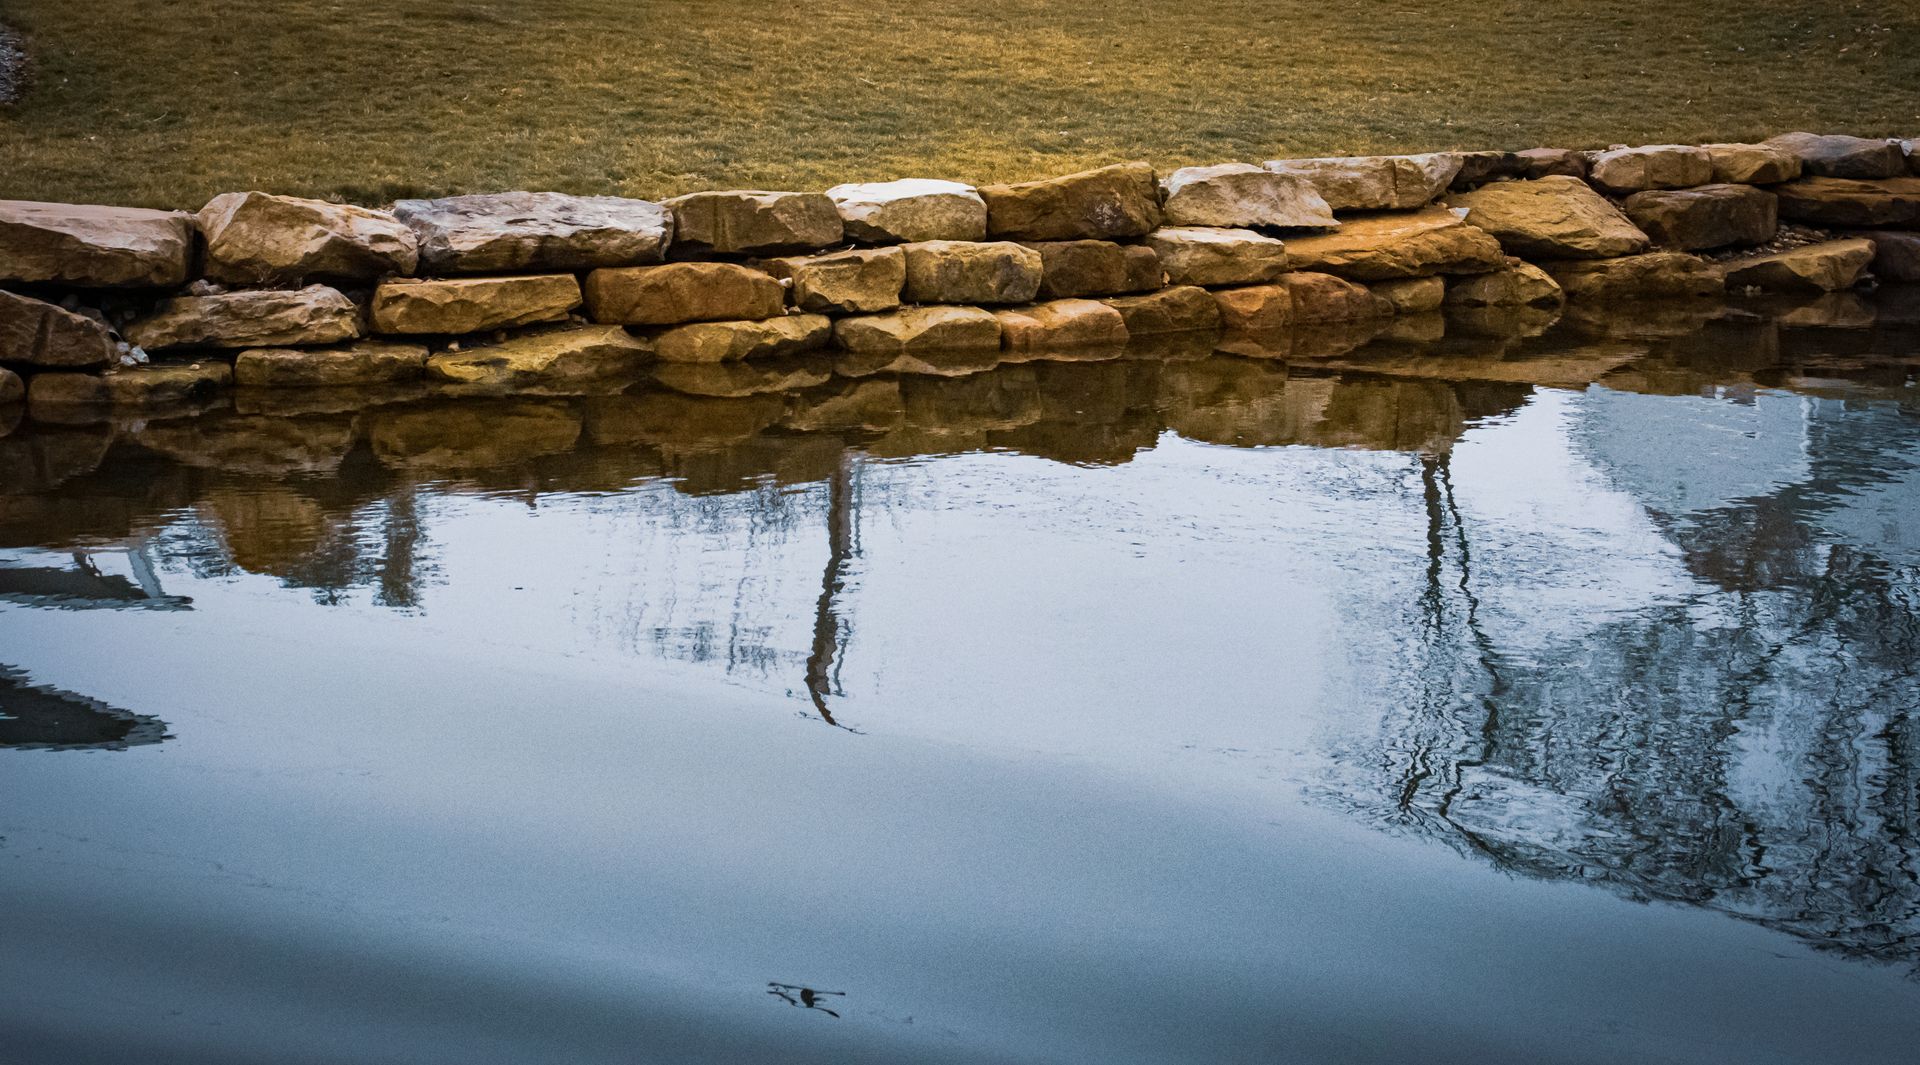 A stone wall is reflected in the water of a pond.